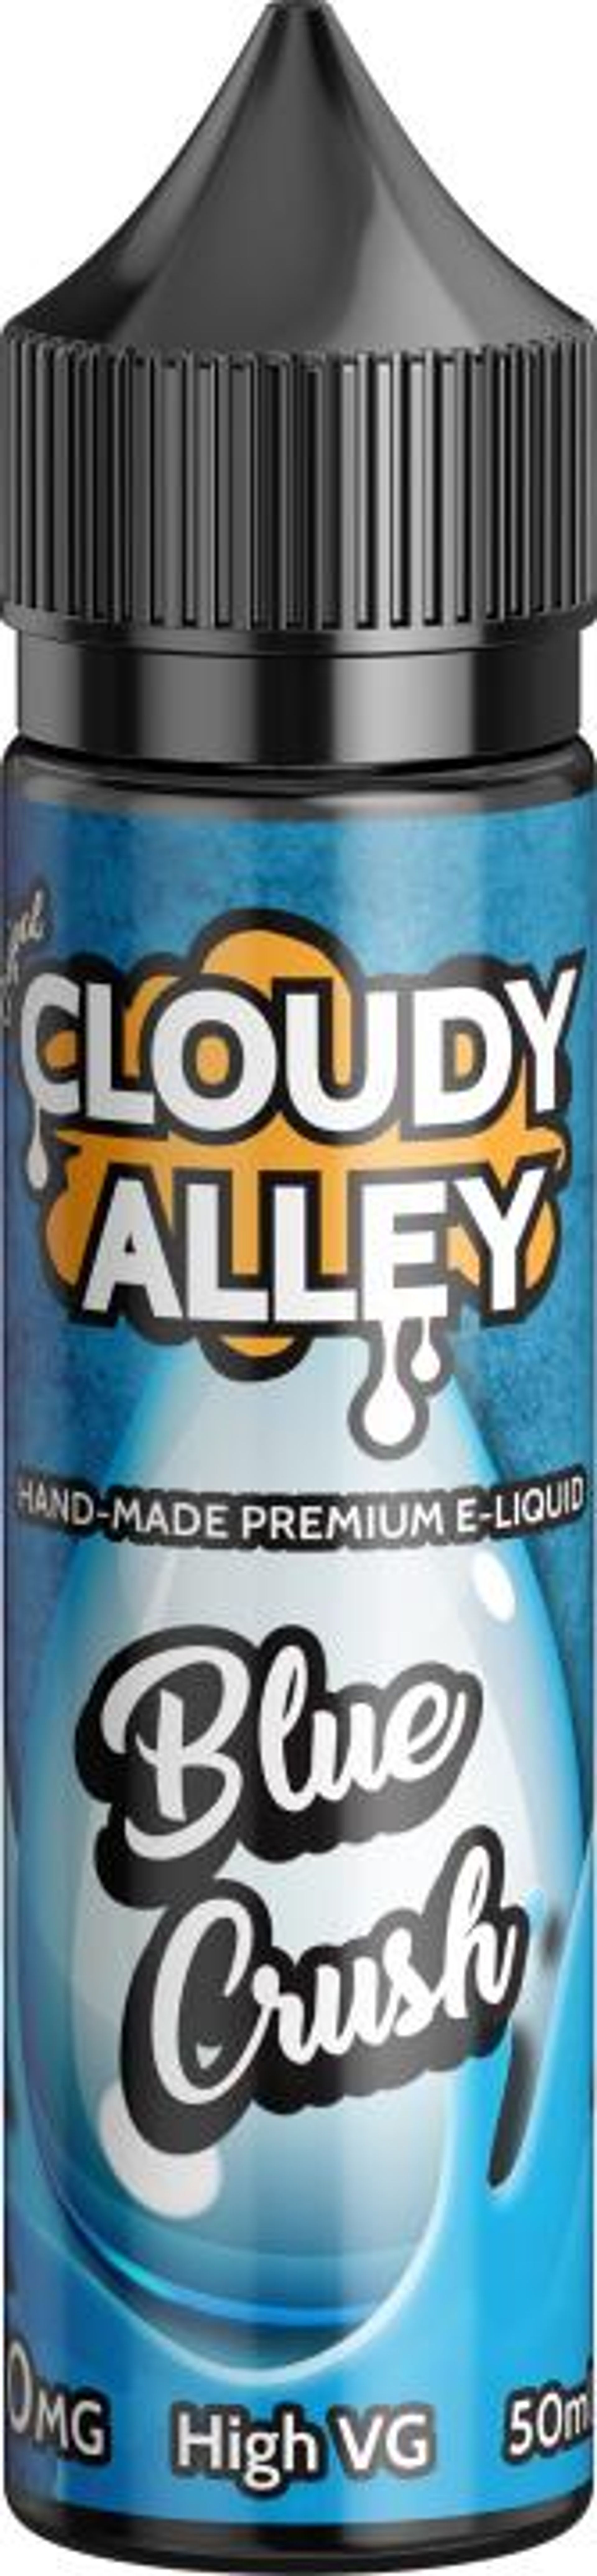 Image of Blue Crush by Cloudy Alley